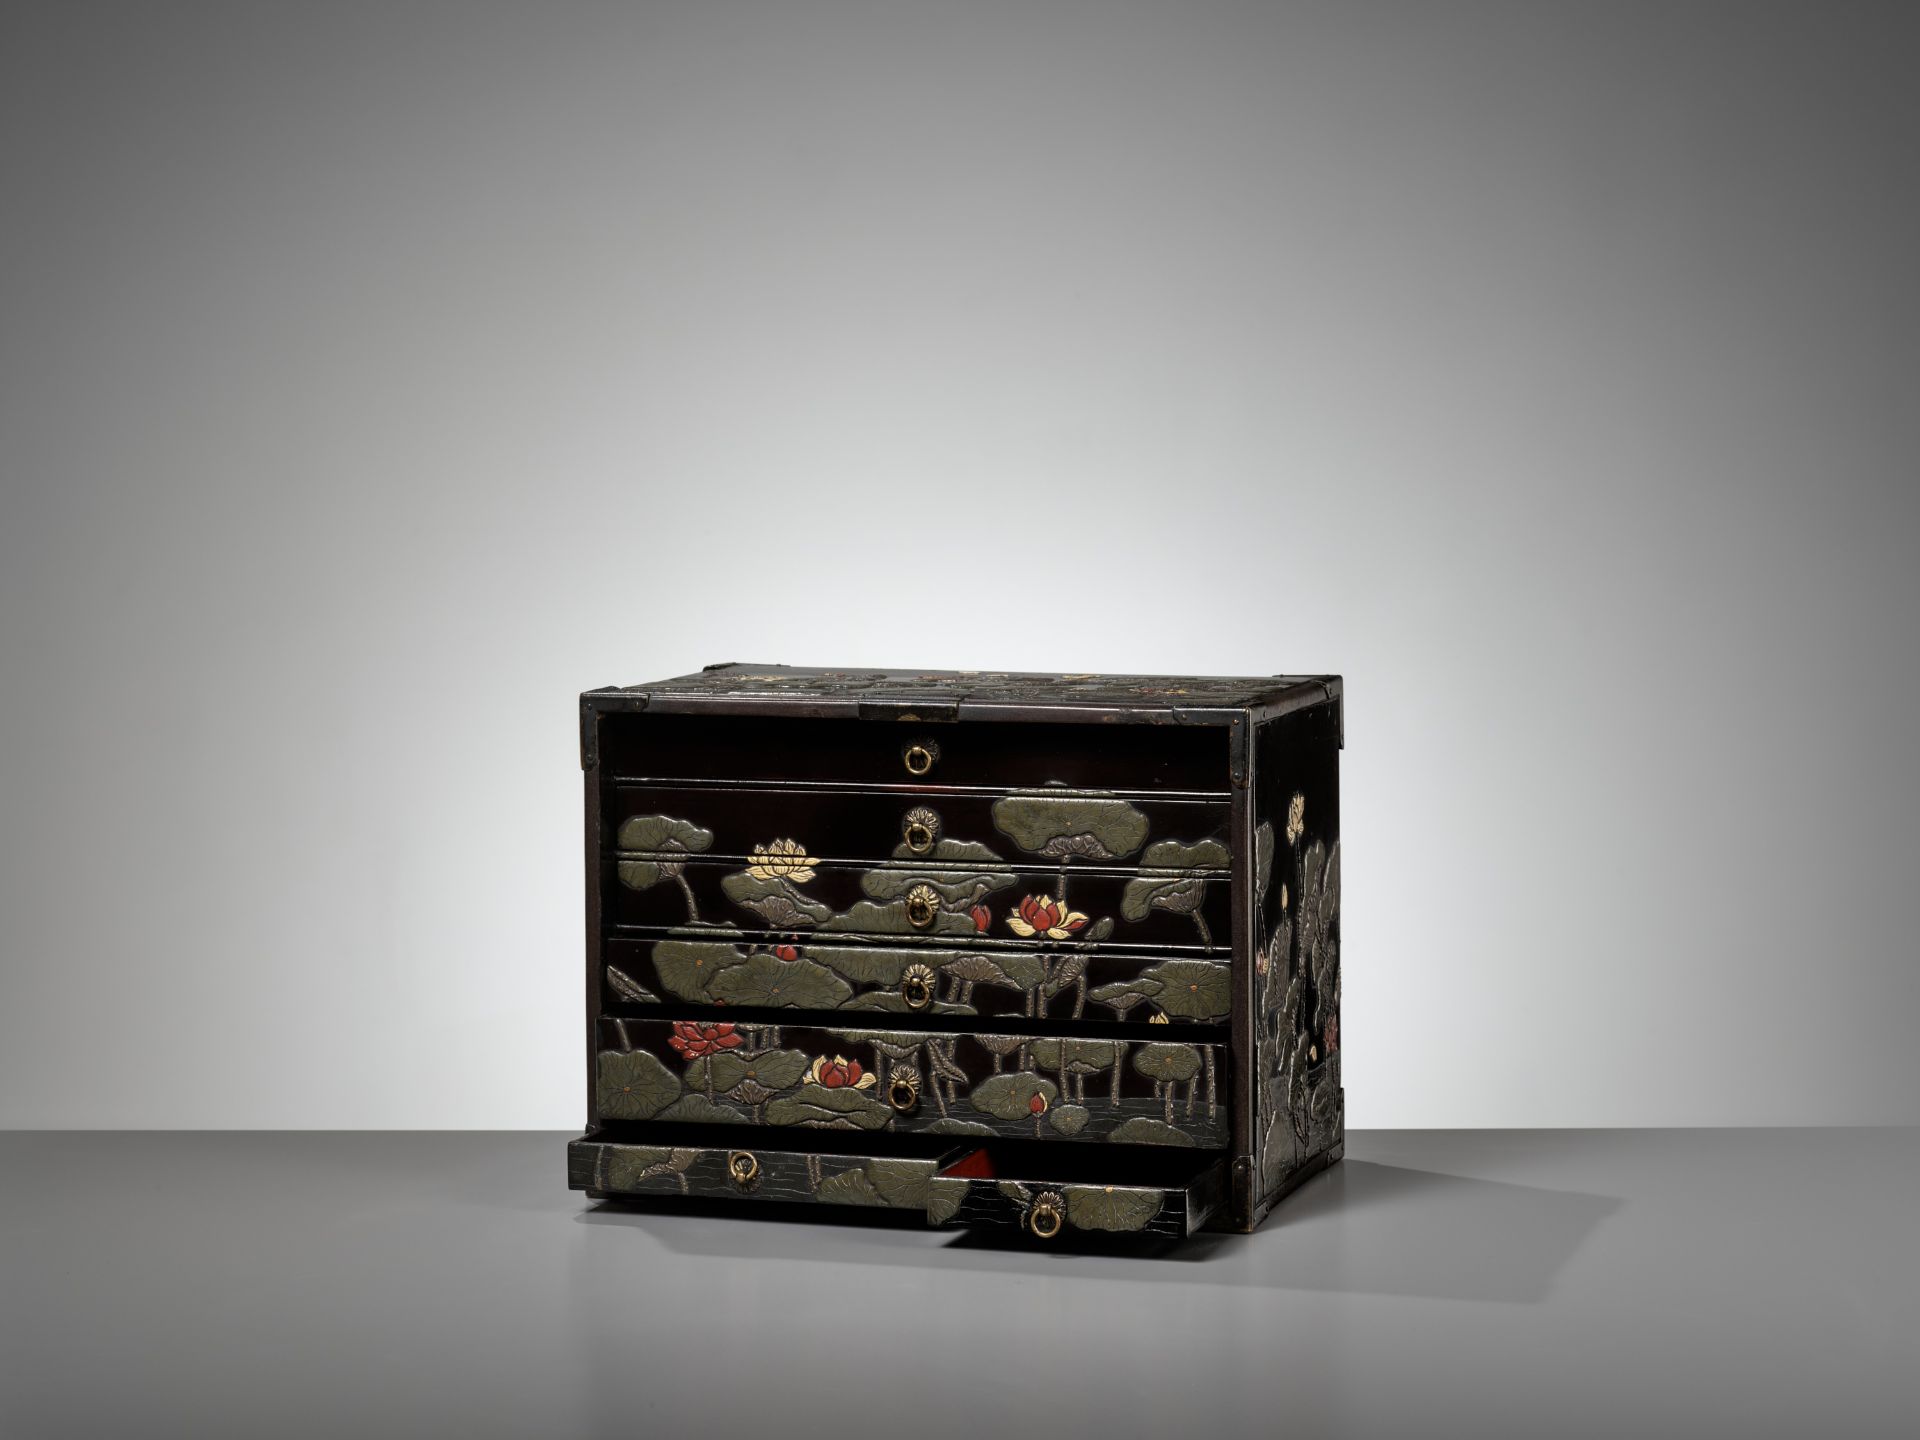 A RITSUO STYLE CERAMIC-INLAID AND LACQUERED WOOD KODANSU (CABINET) WITH A LOTUS POND AND EGRETS - Image 5 of 14